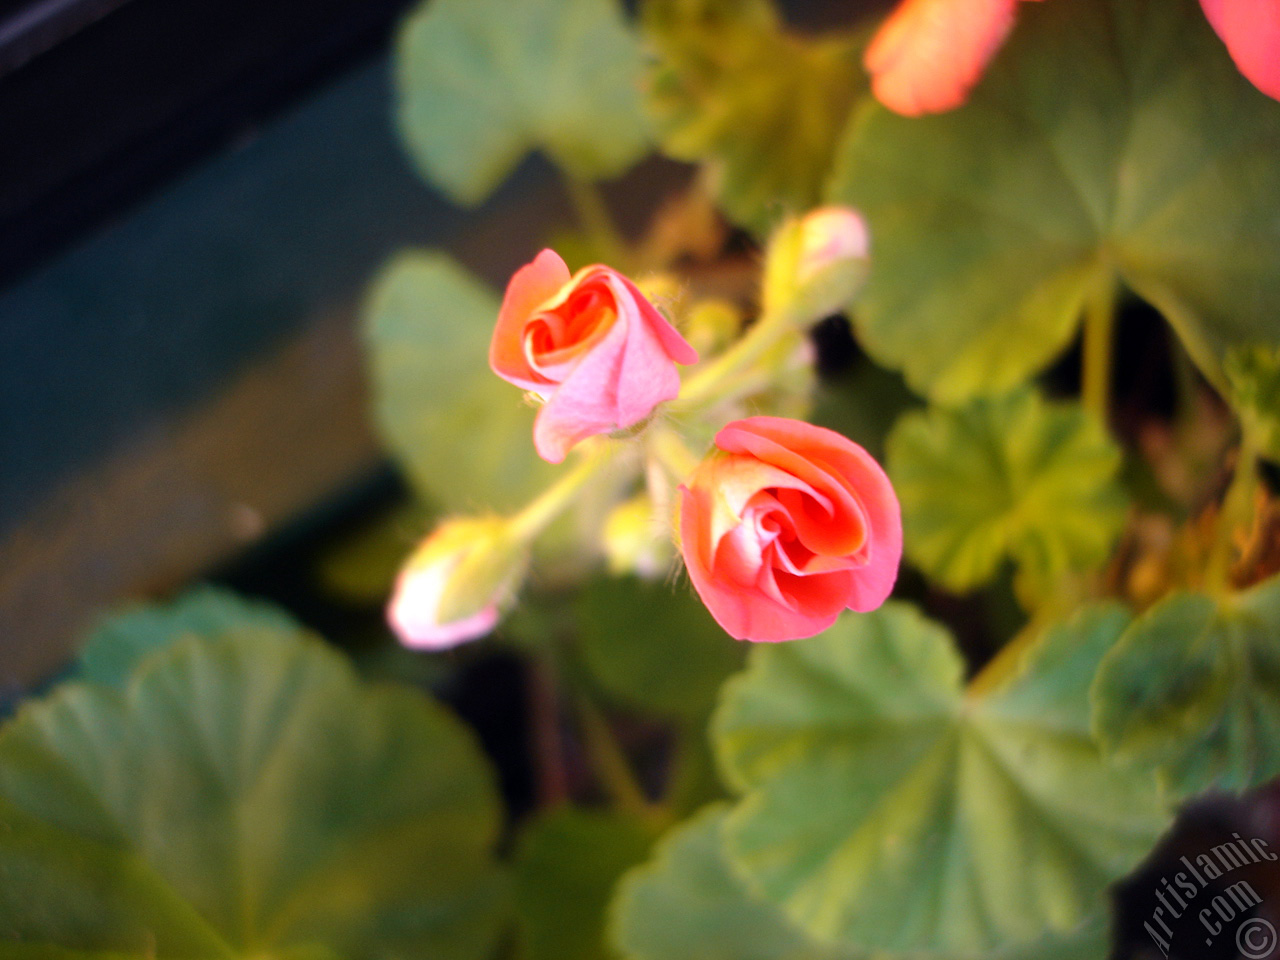 Newly coming out pink color Pelargonia -Geranium- flower.
